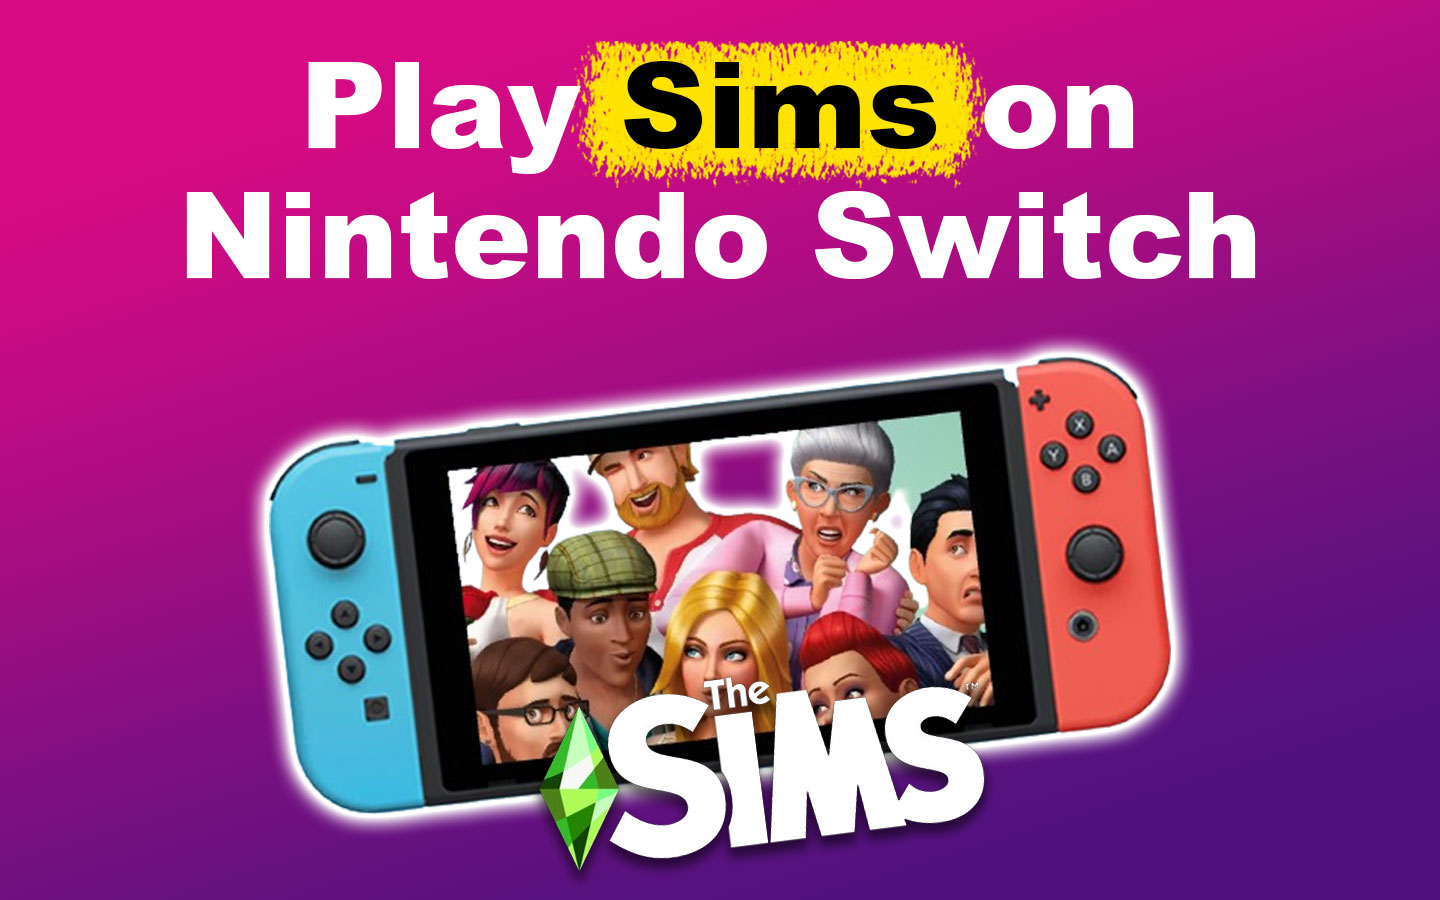 Is The Sims Coming to Switch? [+ Switch Games Like The Sims]